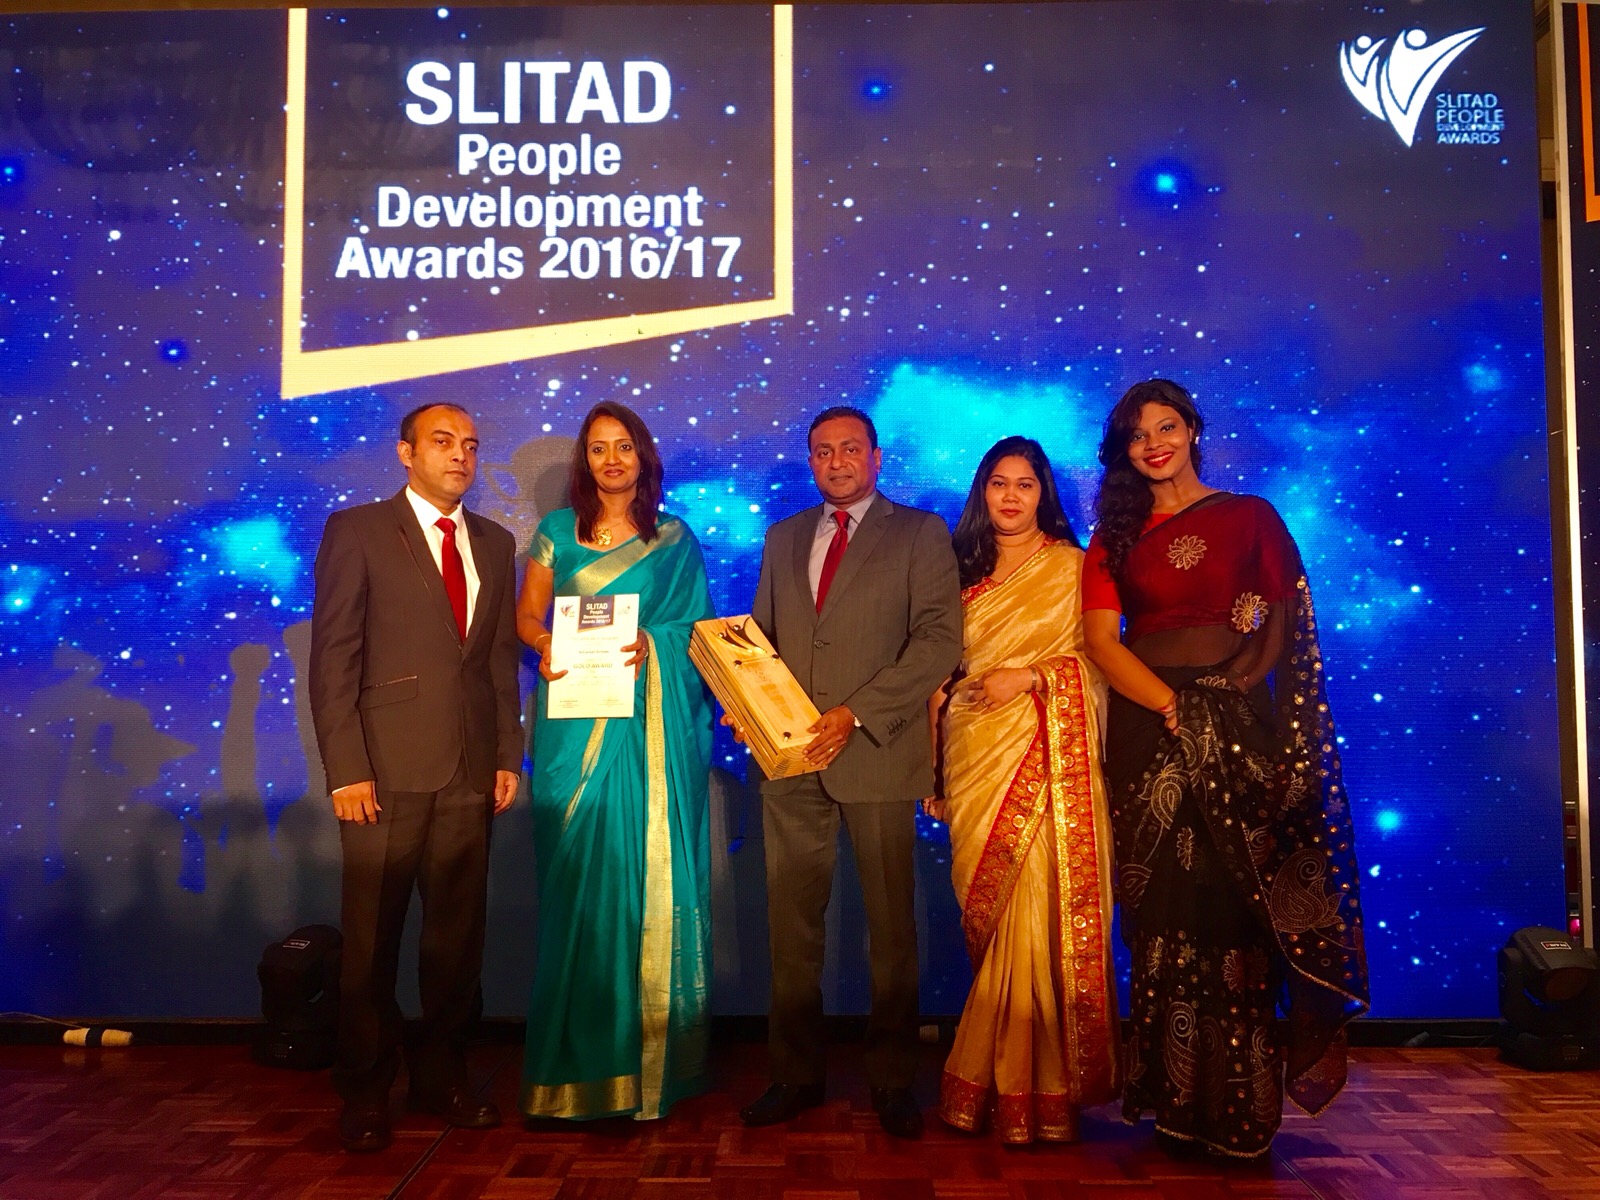 SriLankan Airlines HR team with the SLITAD award 2016/17